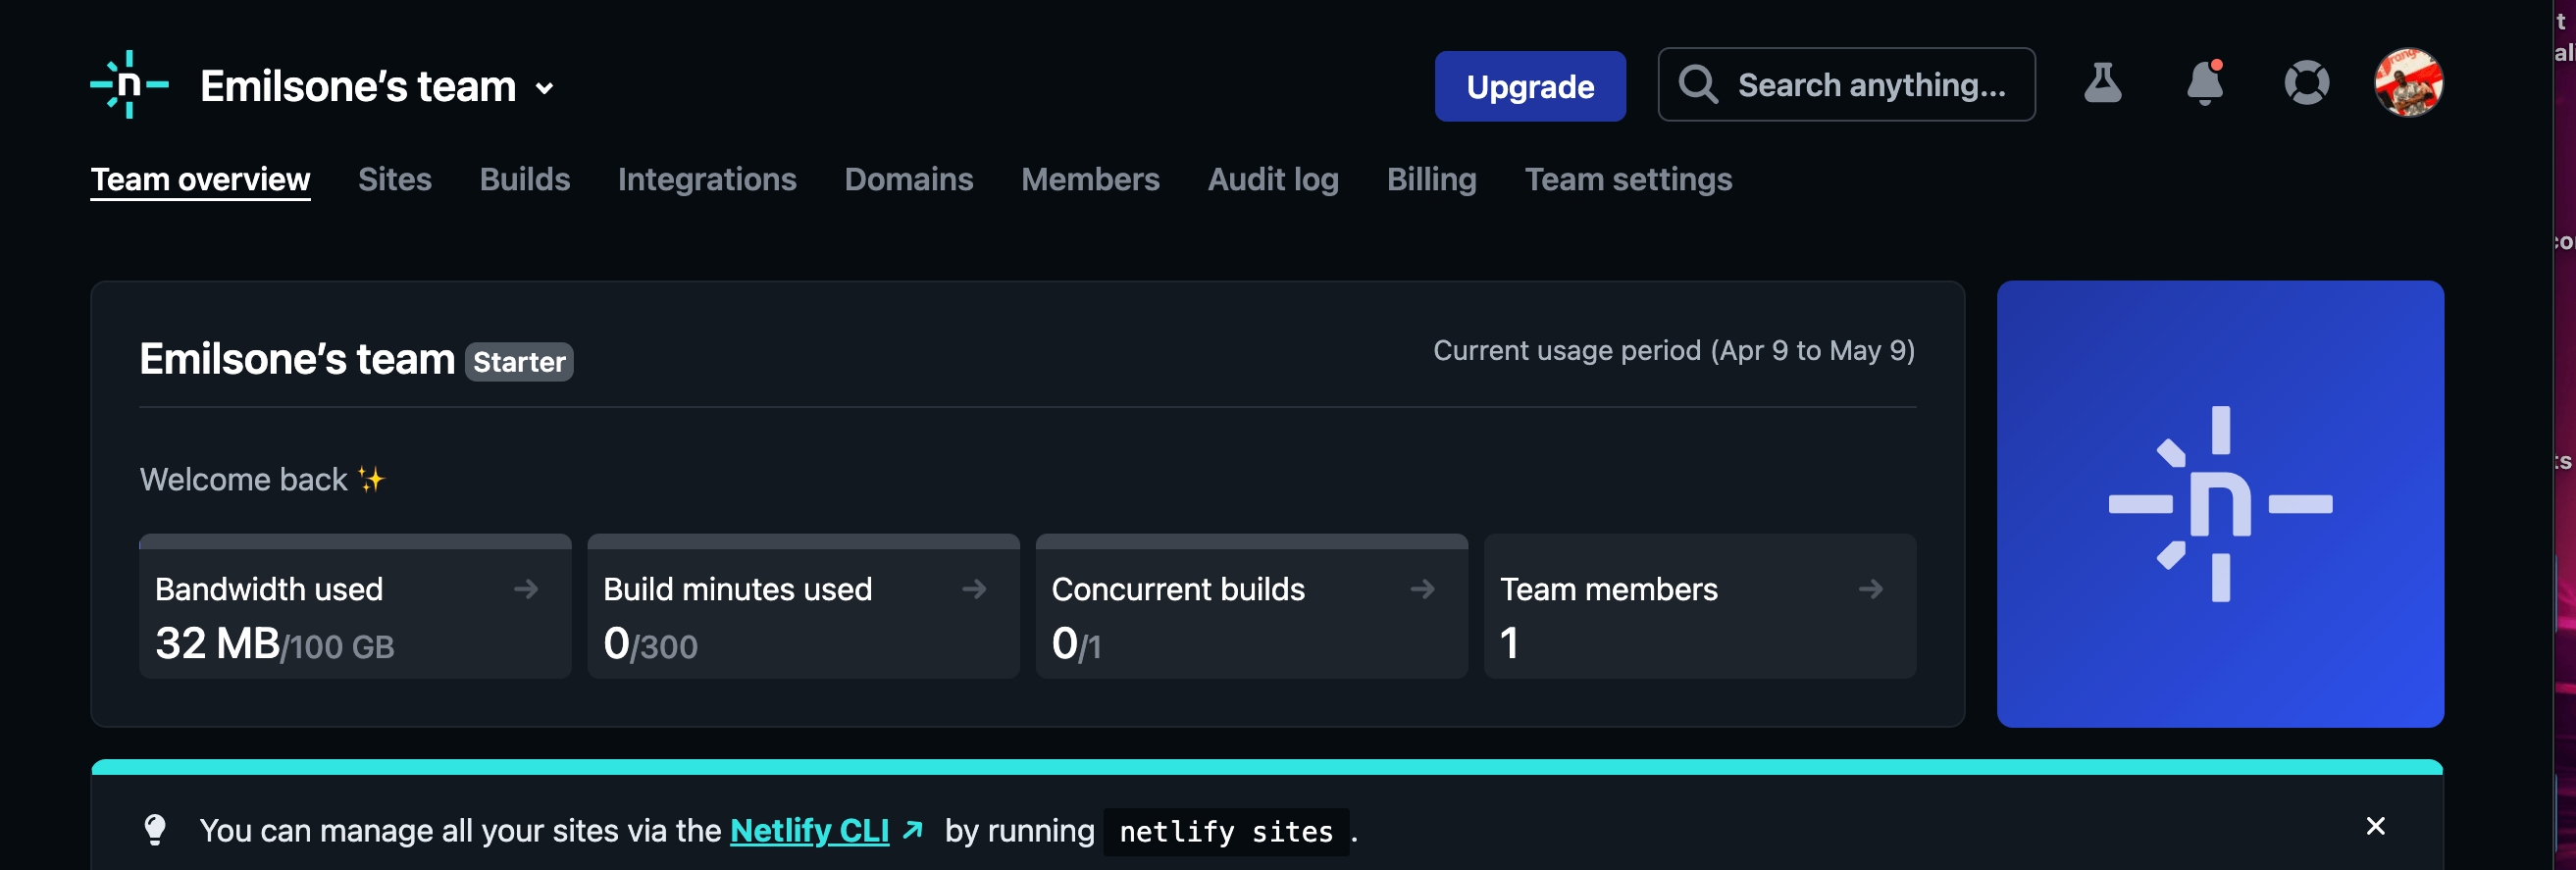 Netlify team page shows bandwidth, build minutes, concurrent builds, number of team members